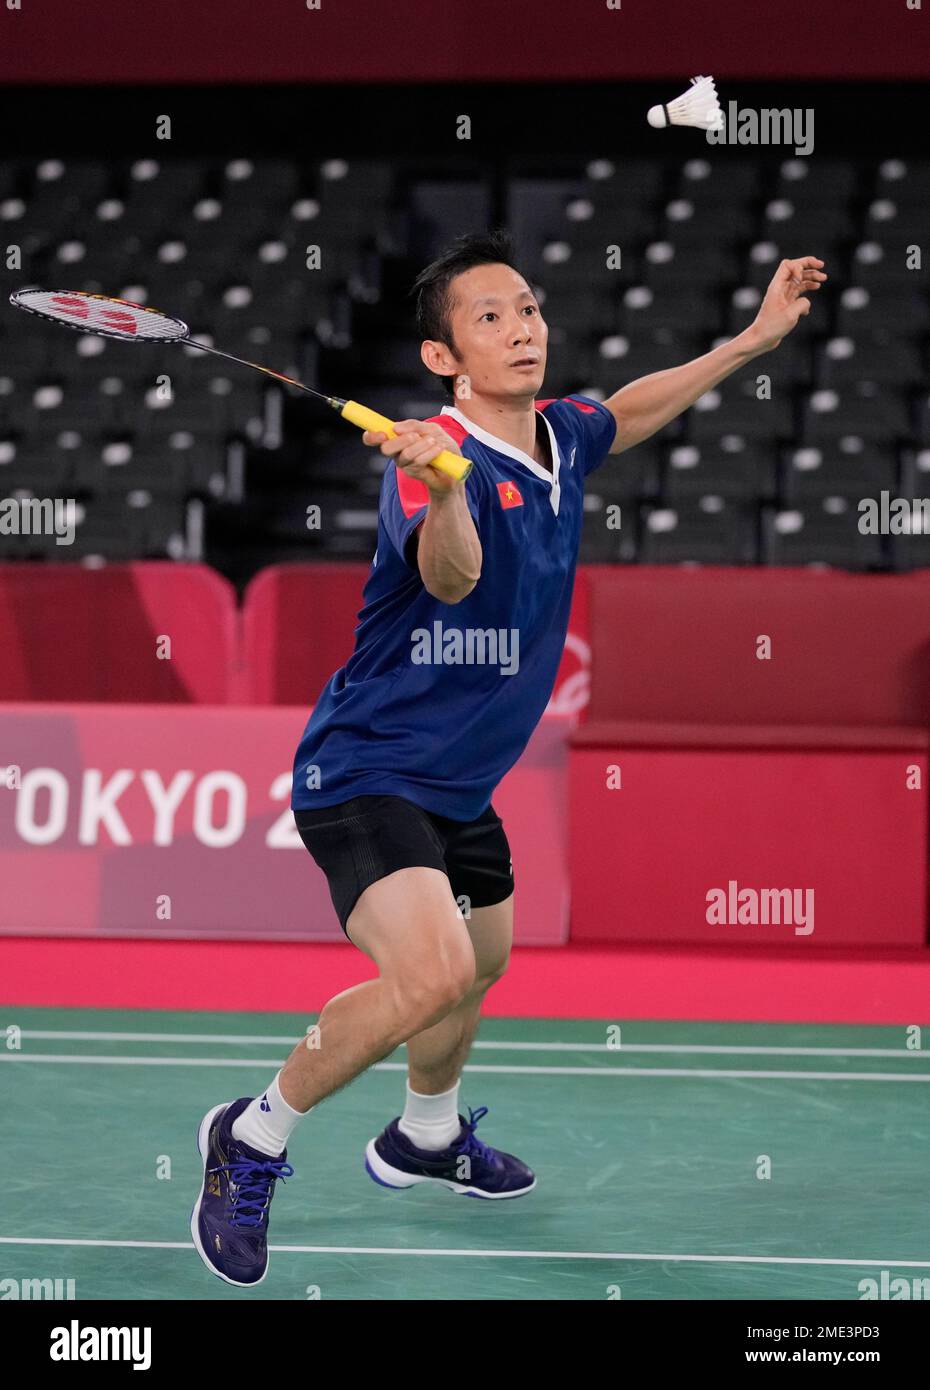 Vietnams Tien Minh Nguyen competes against Ade Resky Dwicahyo of Azerbaijan during mens singles group play stage Badminton match at the 2020 Summer Olympics, Tuesday, July 27, 2021, in Tokyo, Japan